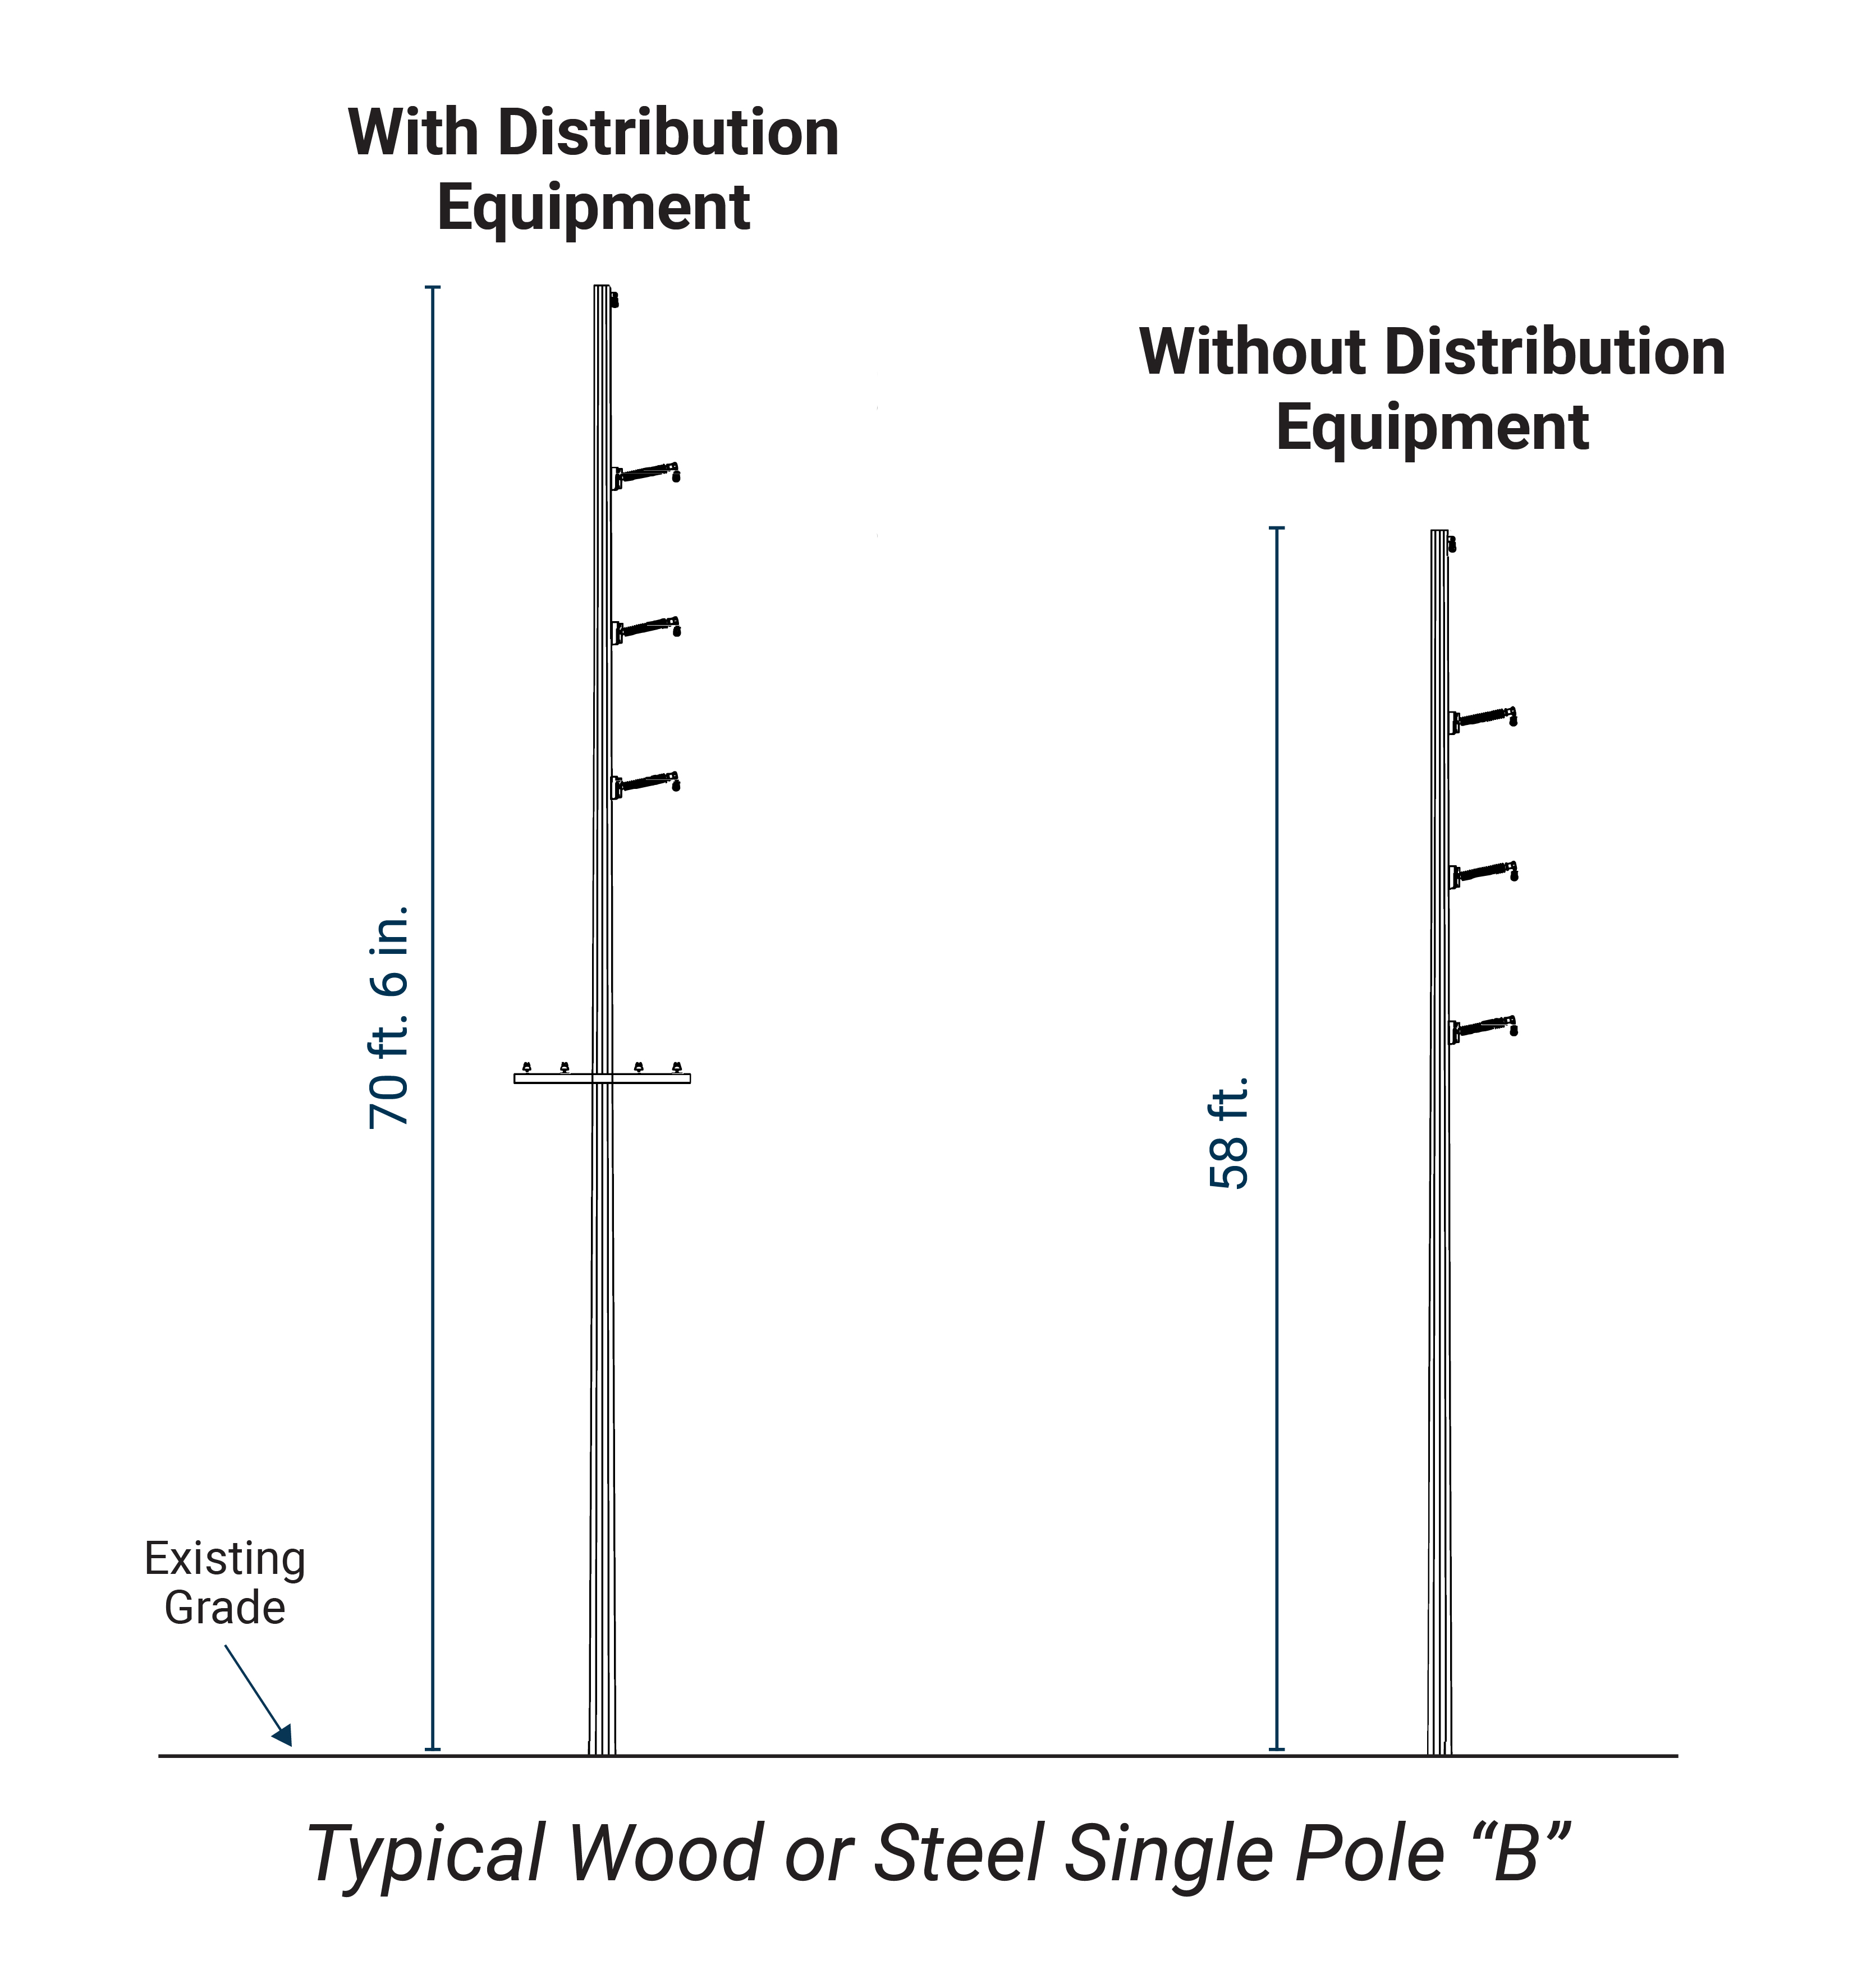 image of pole diagram with typical wood and steel single pole B